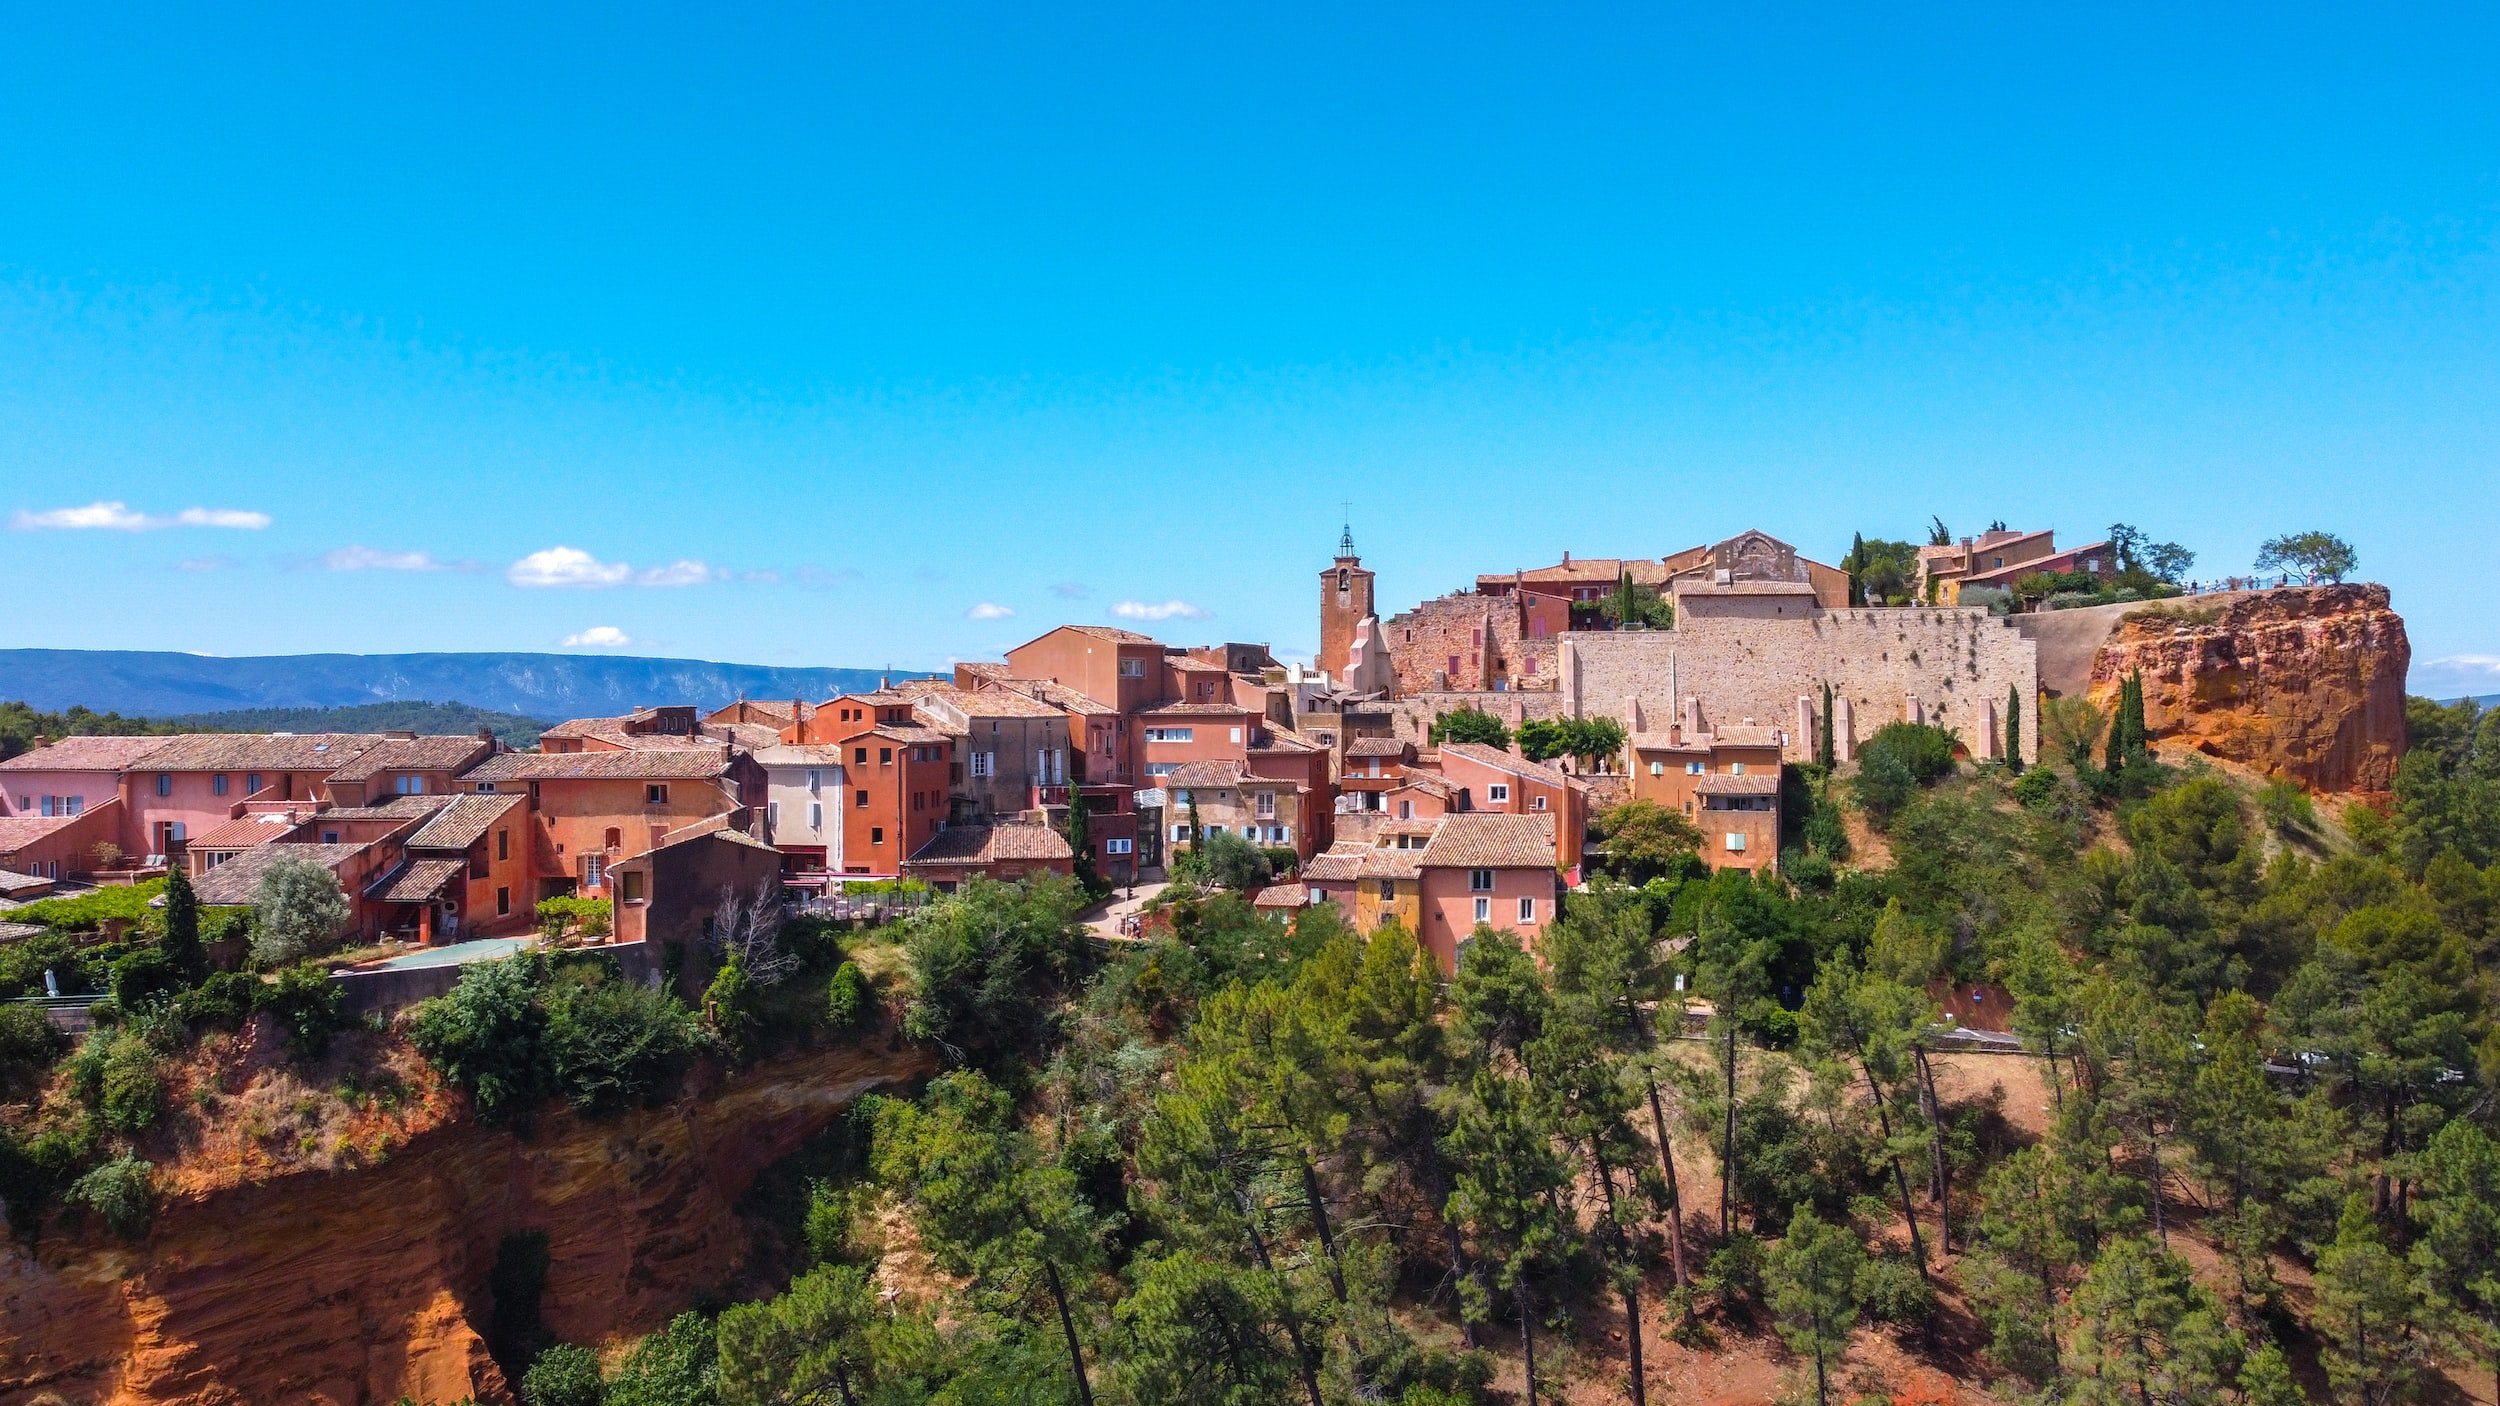 Visit the Provencal villages and prestigious castles of southern France